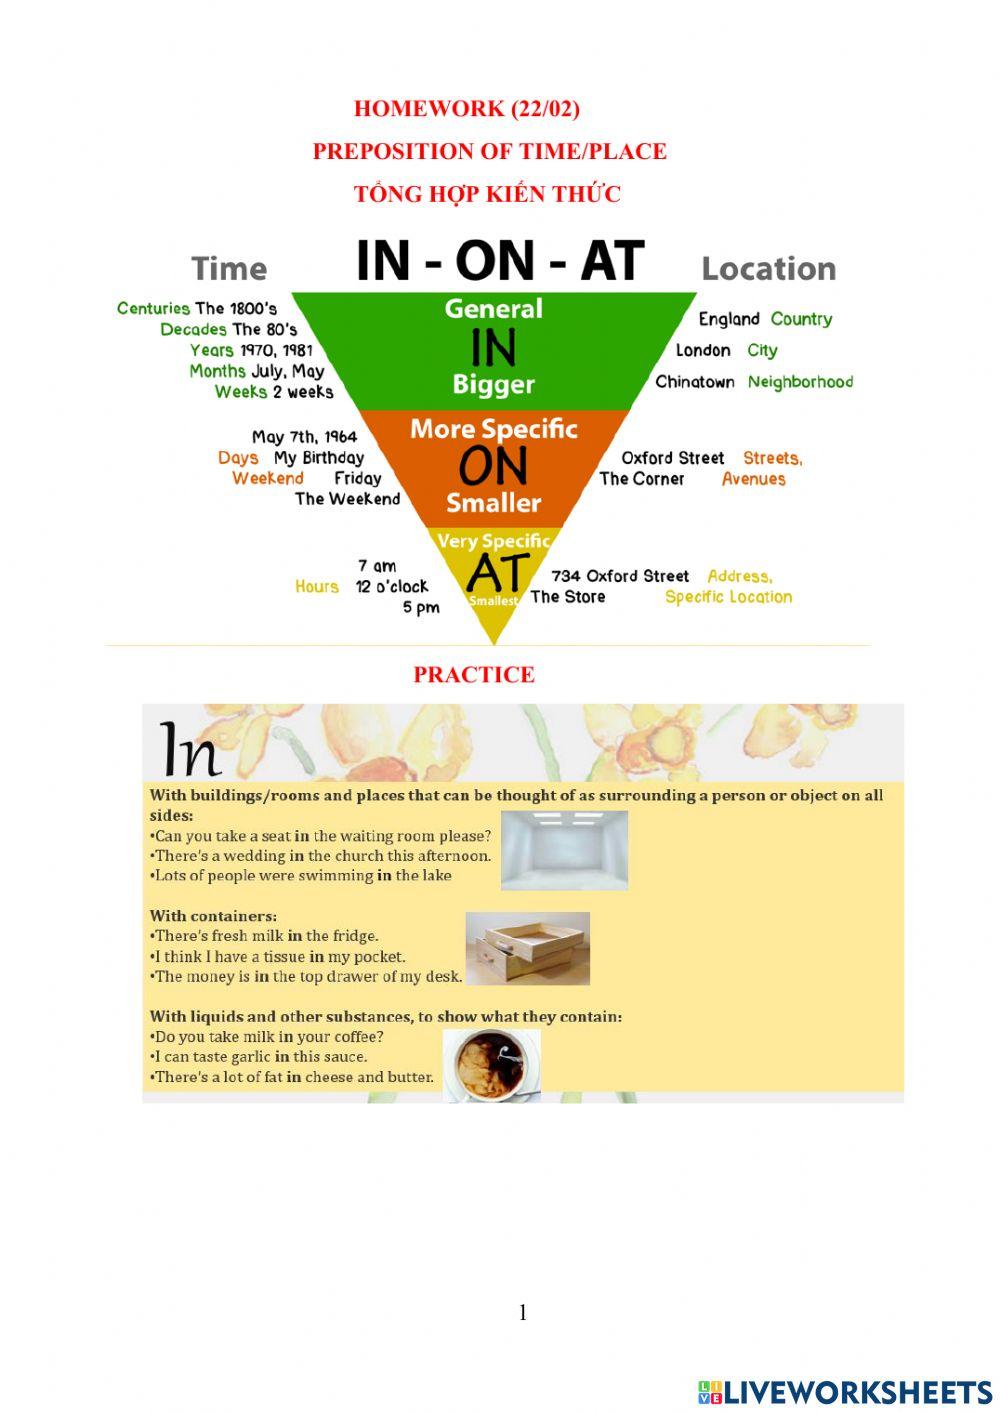 Preposition of time, place